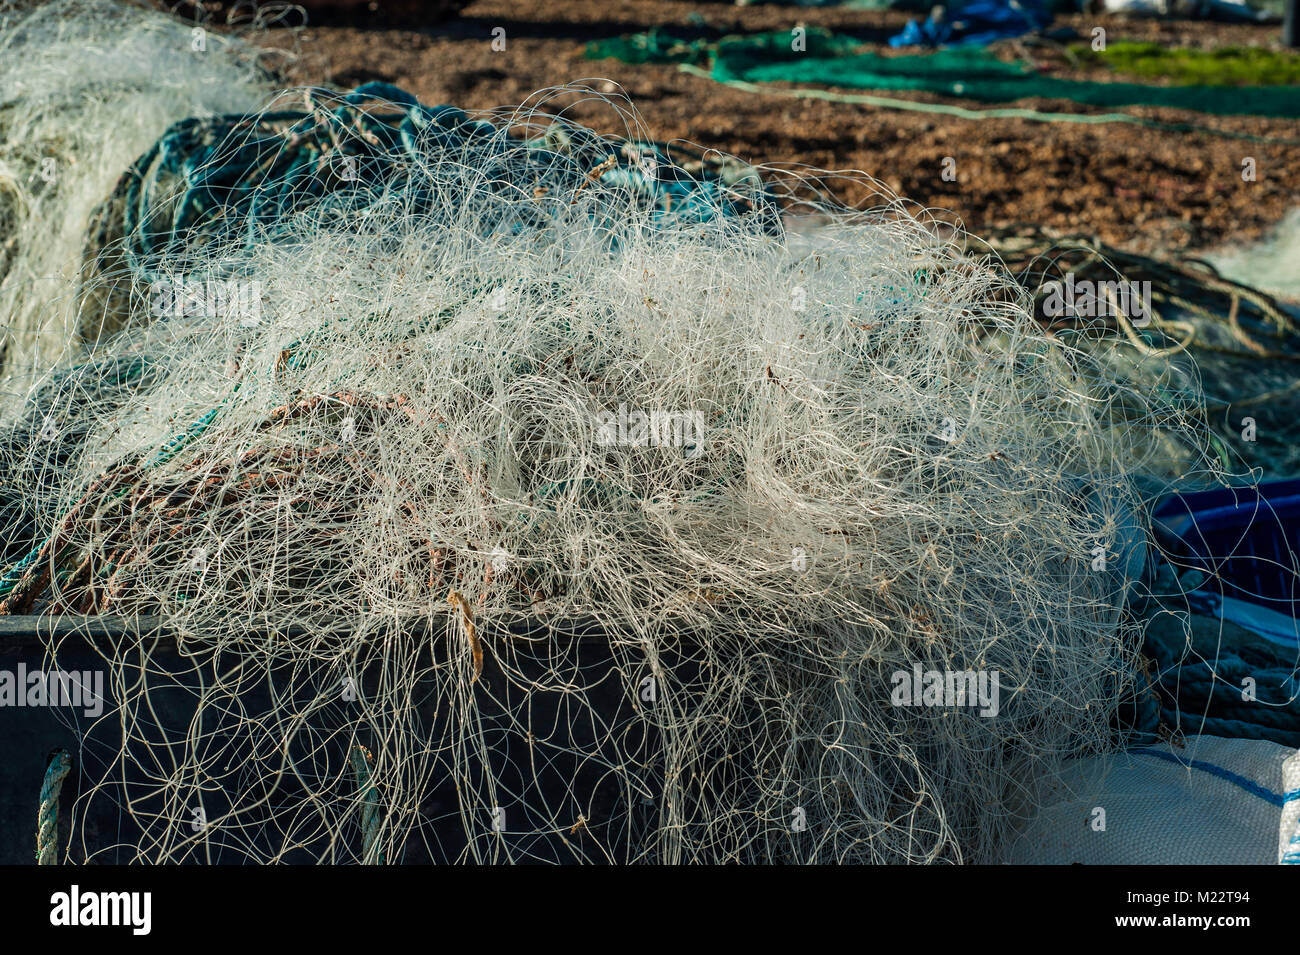 2,130 Tangled Fishing Line Images, Stock Photos, 3D objects